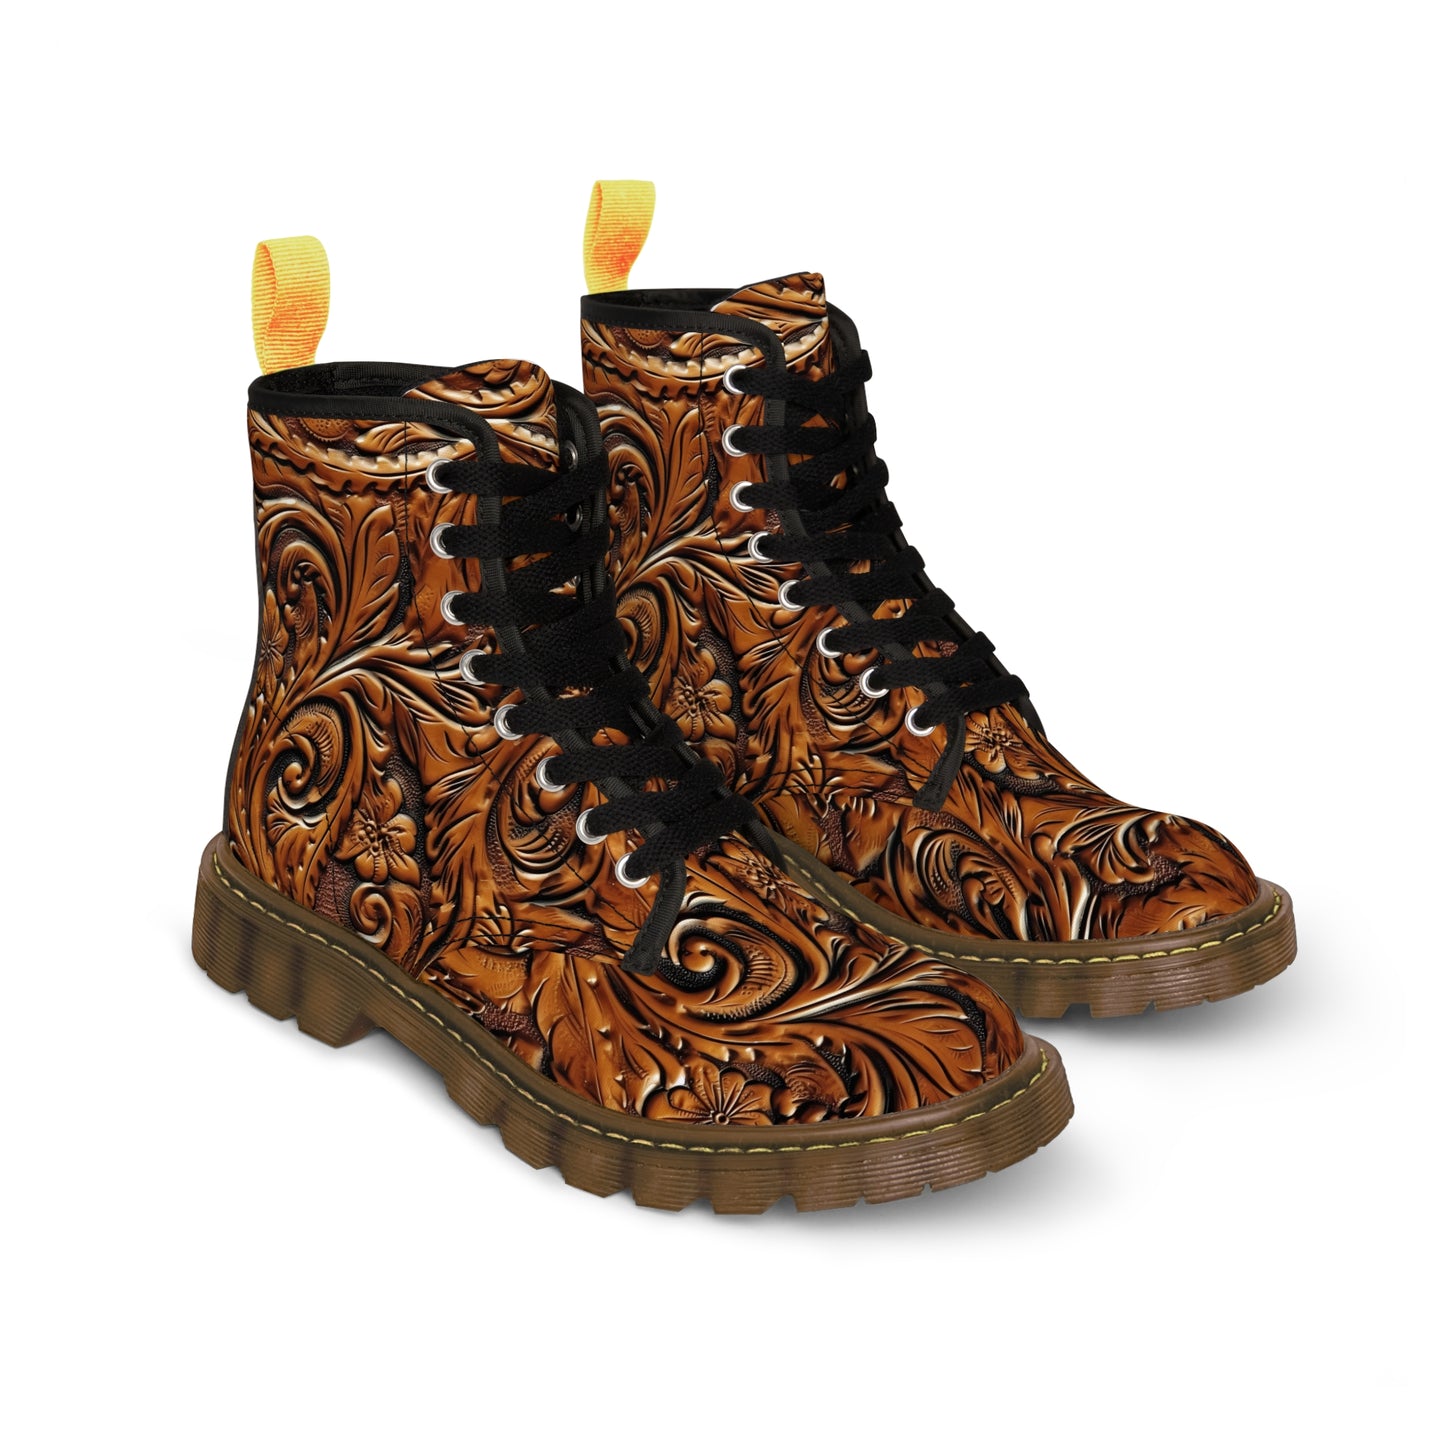 Tooled Leather Women's Canvas Boots (Brown) by Studio Ten Design